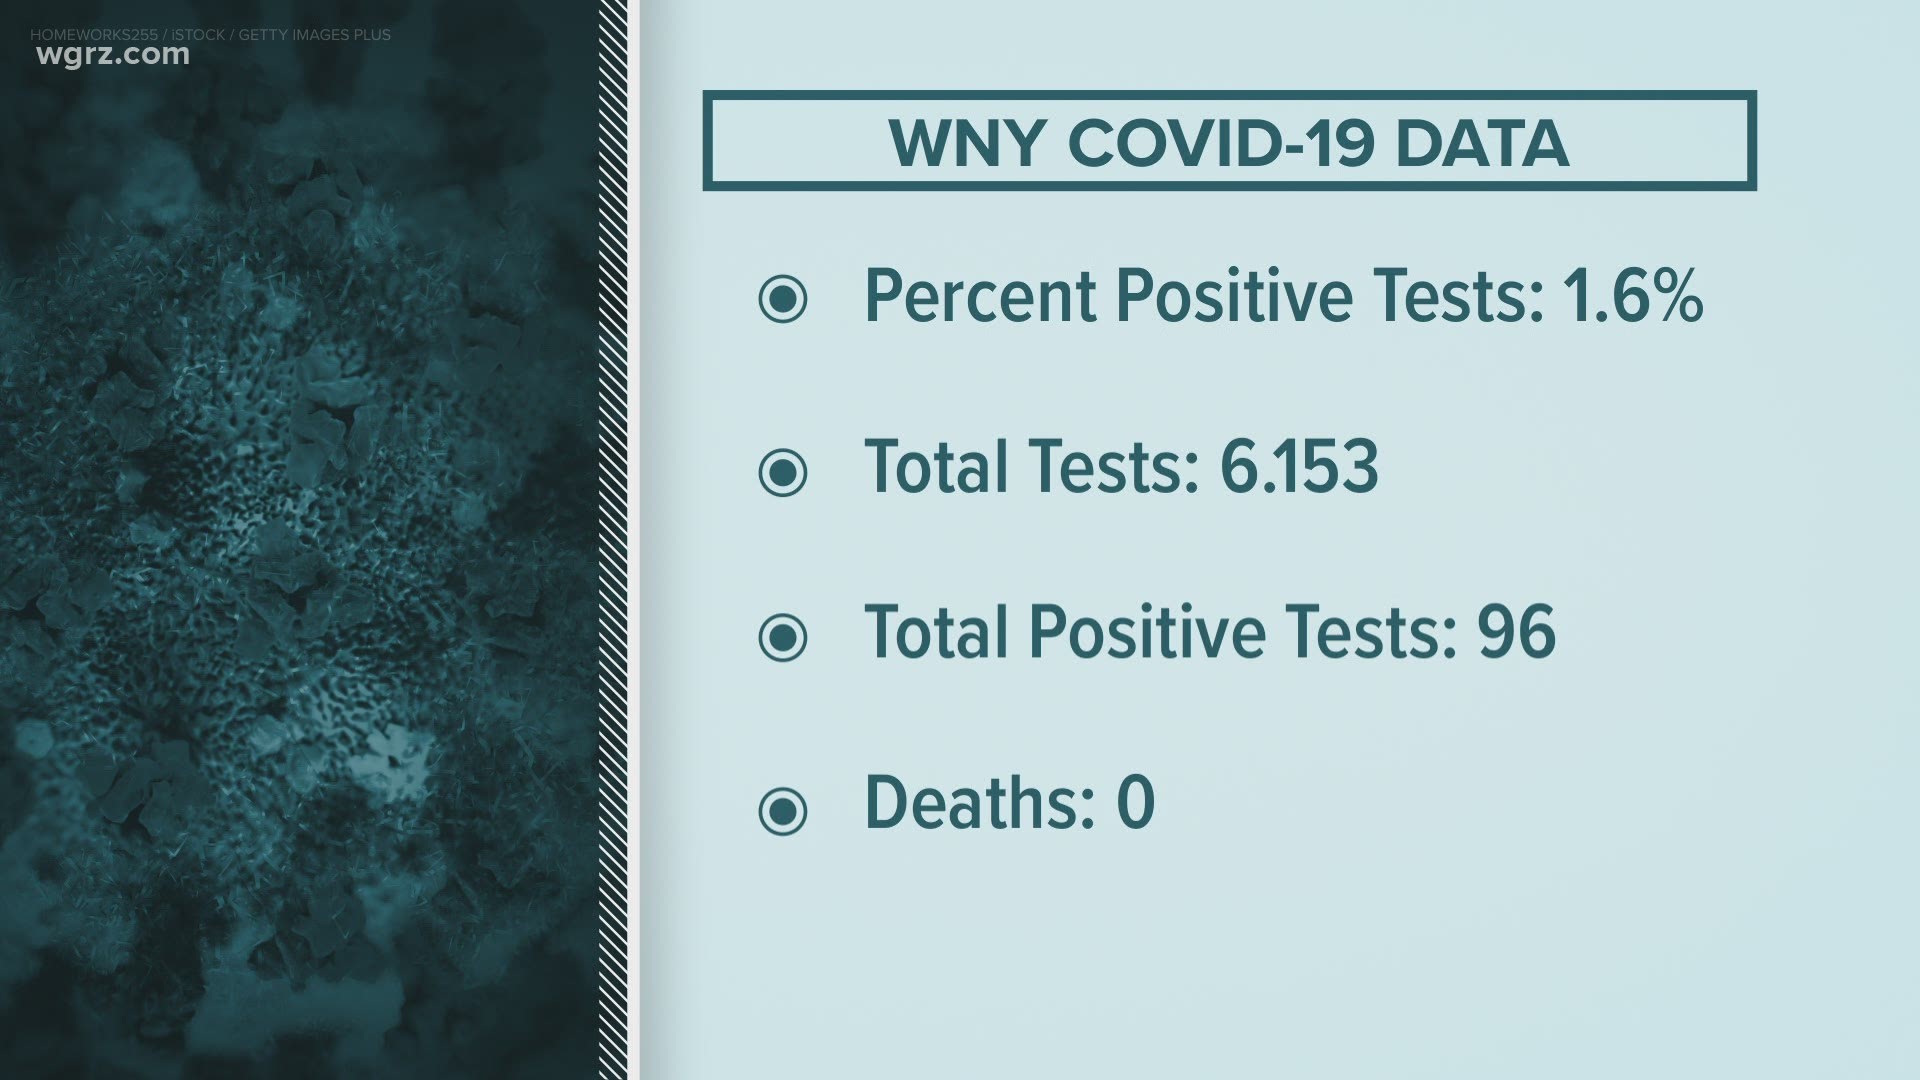 Here in Western New York our numbers continue to trend above every other region. Out of more than 6-thousand tests Saturday, only 96 came back positive.